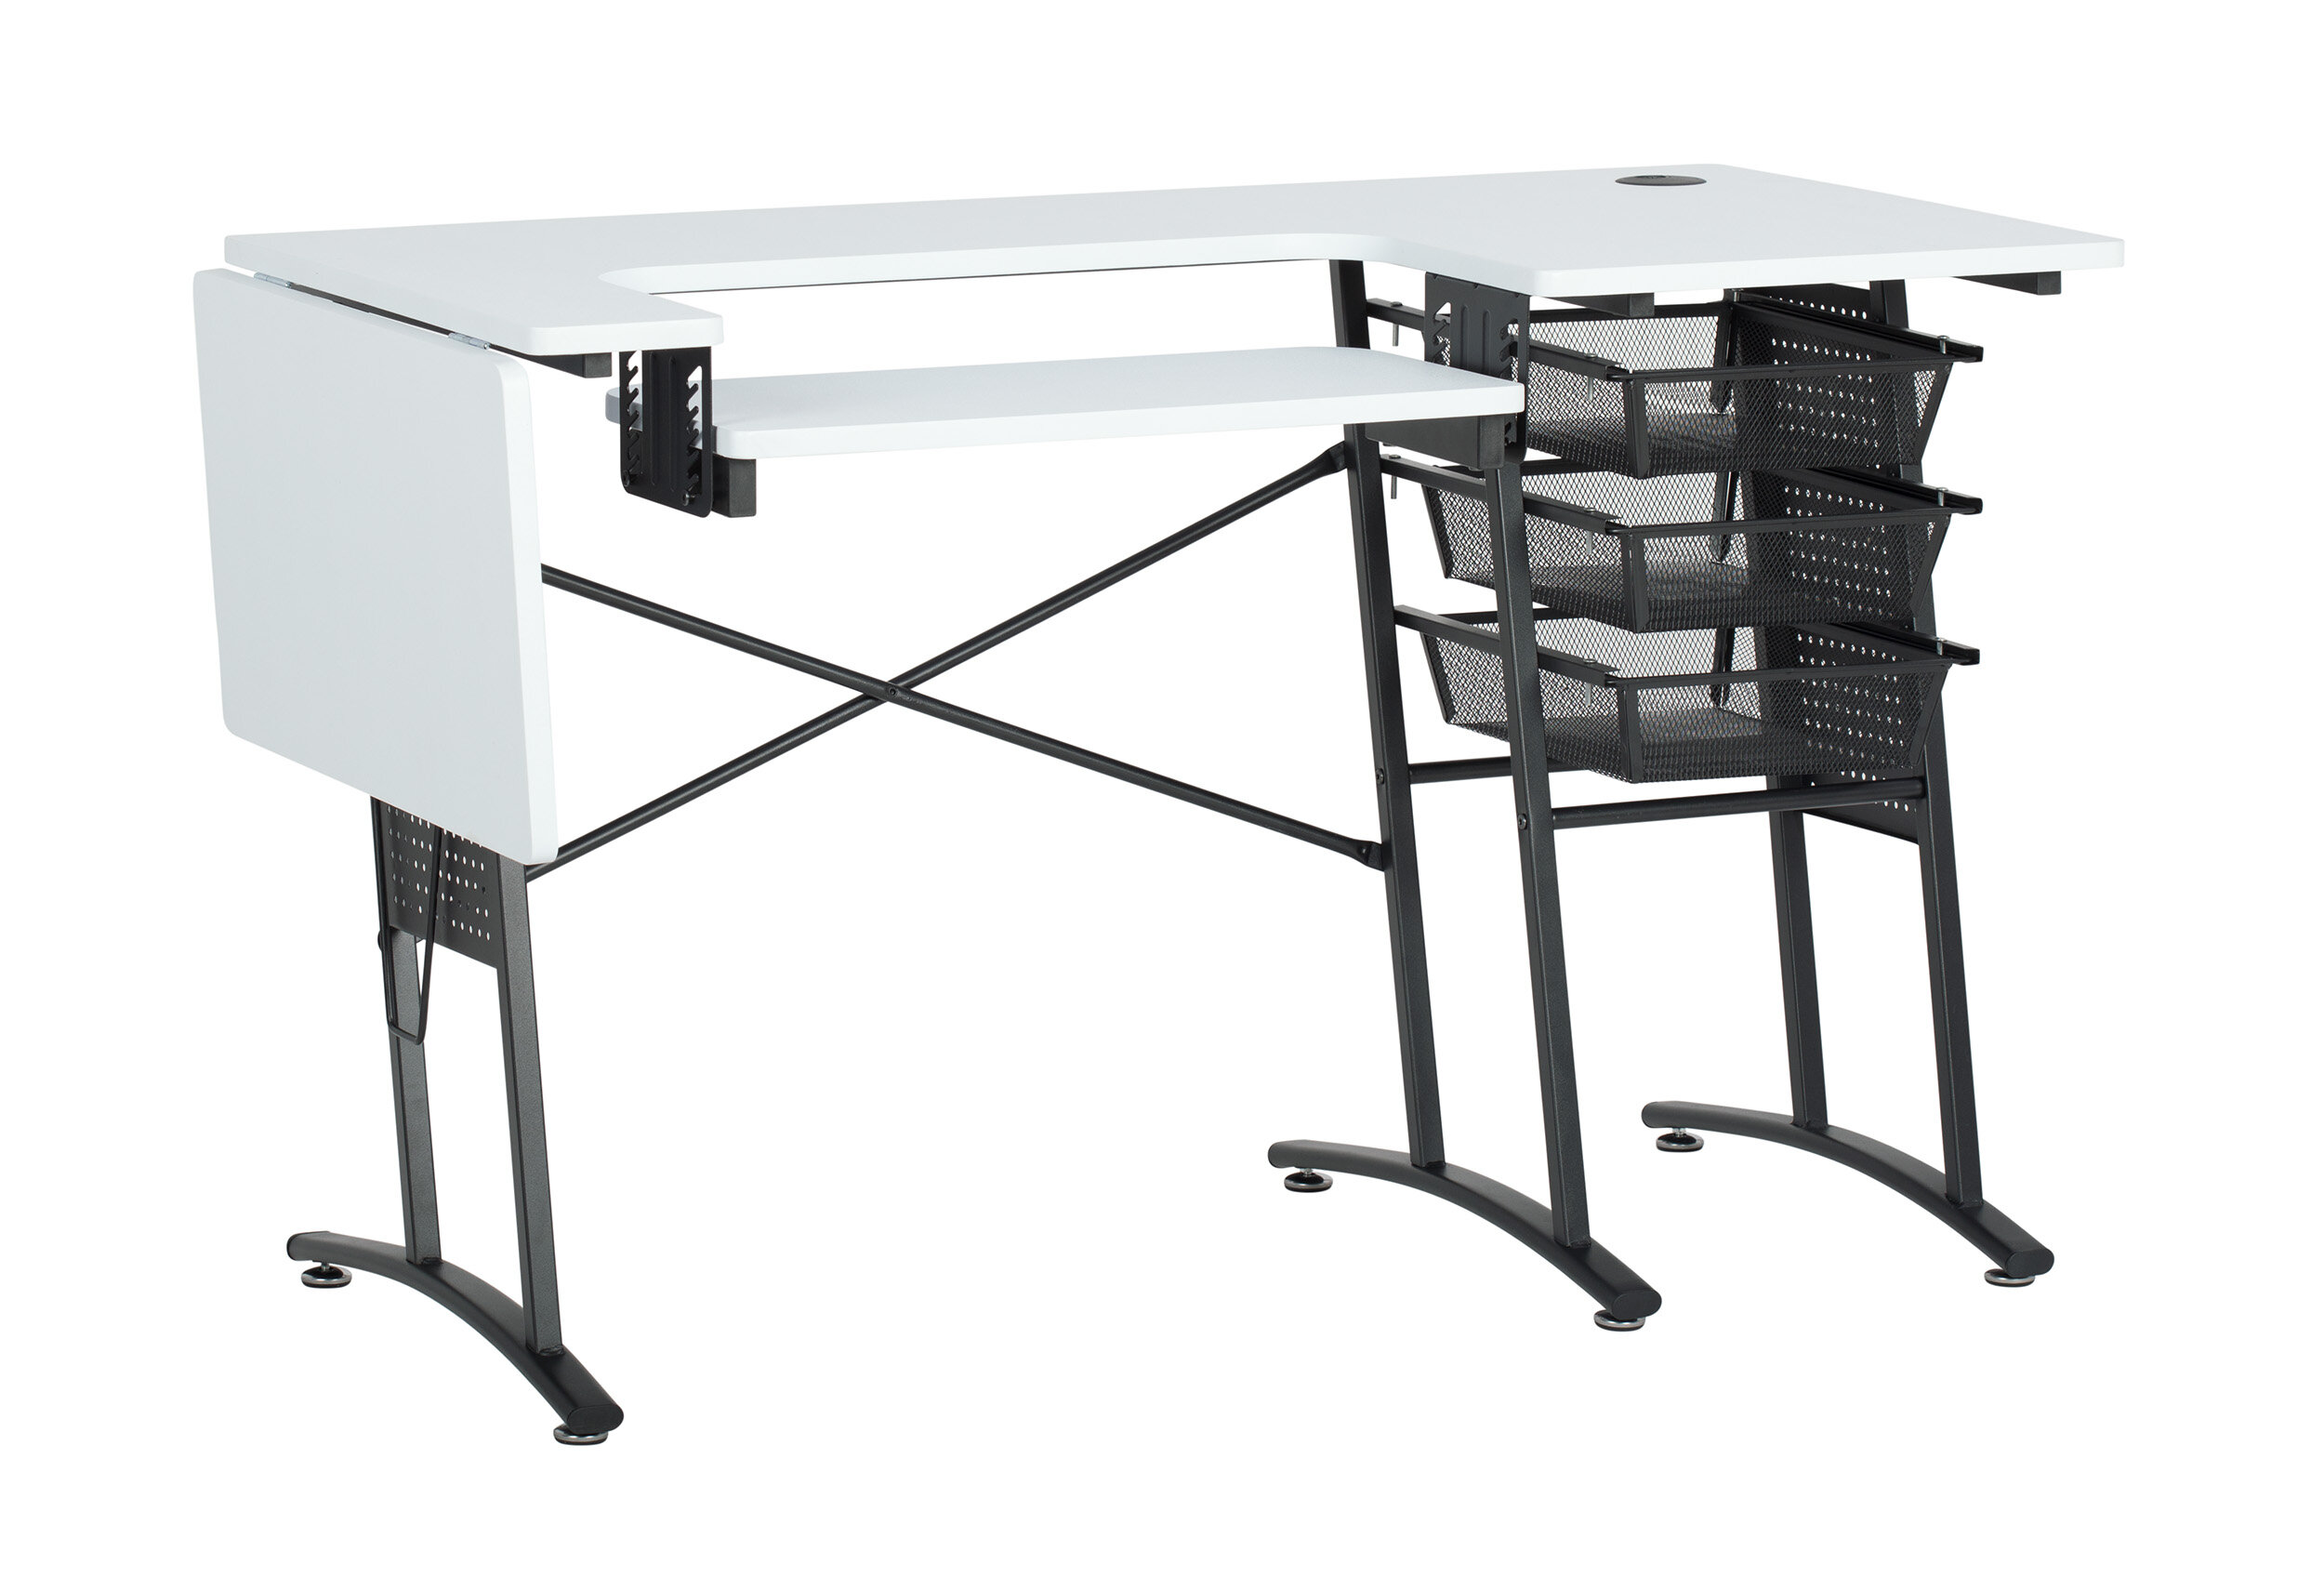 Sew Ready Charcoal White Master Sewing Machine Table Craft or Computer Desk 